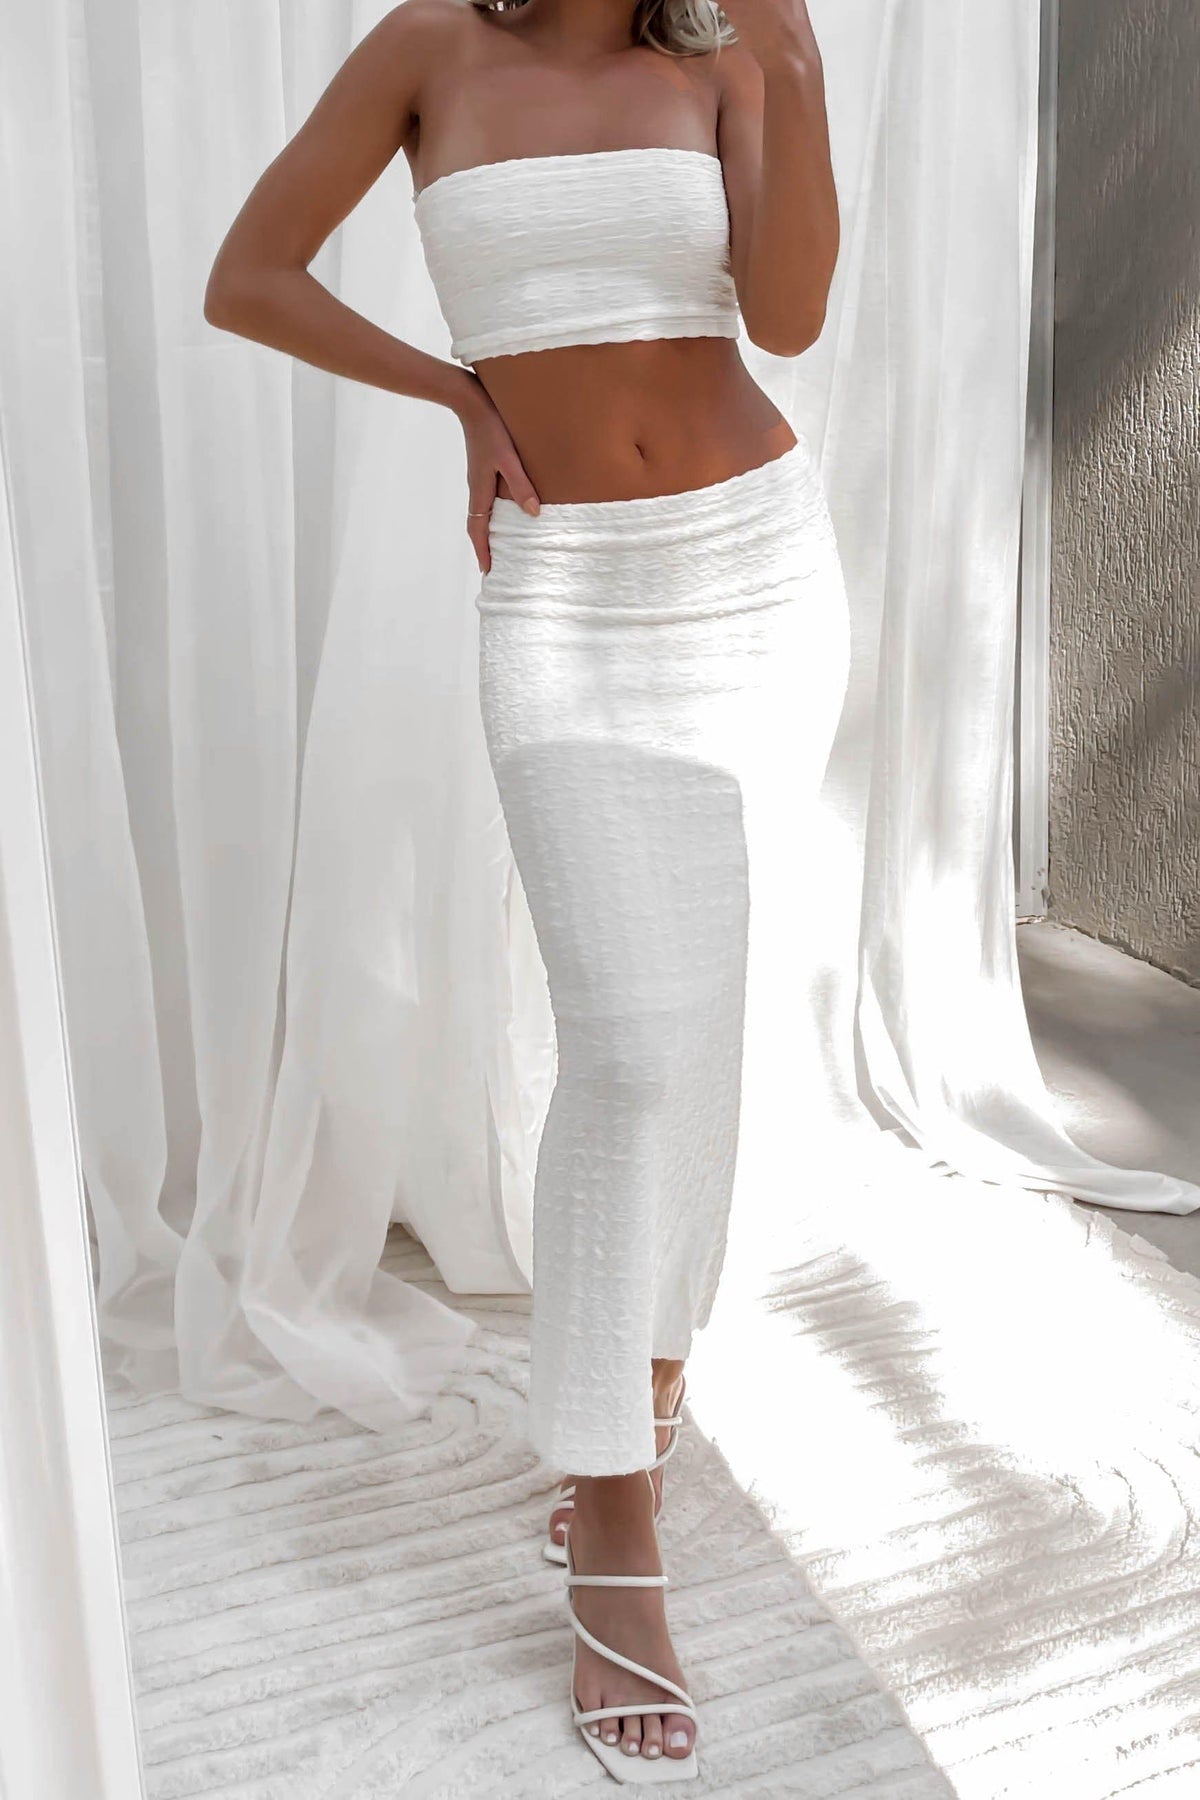 Tanzie Skirt, BOTTOMS, COTTON AND POLYESTER, MAXI SKIRT, MIDI SKIRT, NEW ARRIVALS, POLYESTER &amp; COTTON, POLYESTER AND COTTON, SKIRTS, WHITE, , -MISHKAH